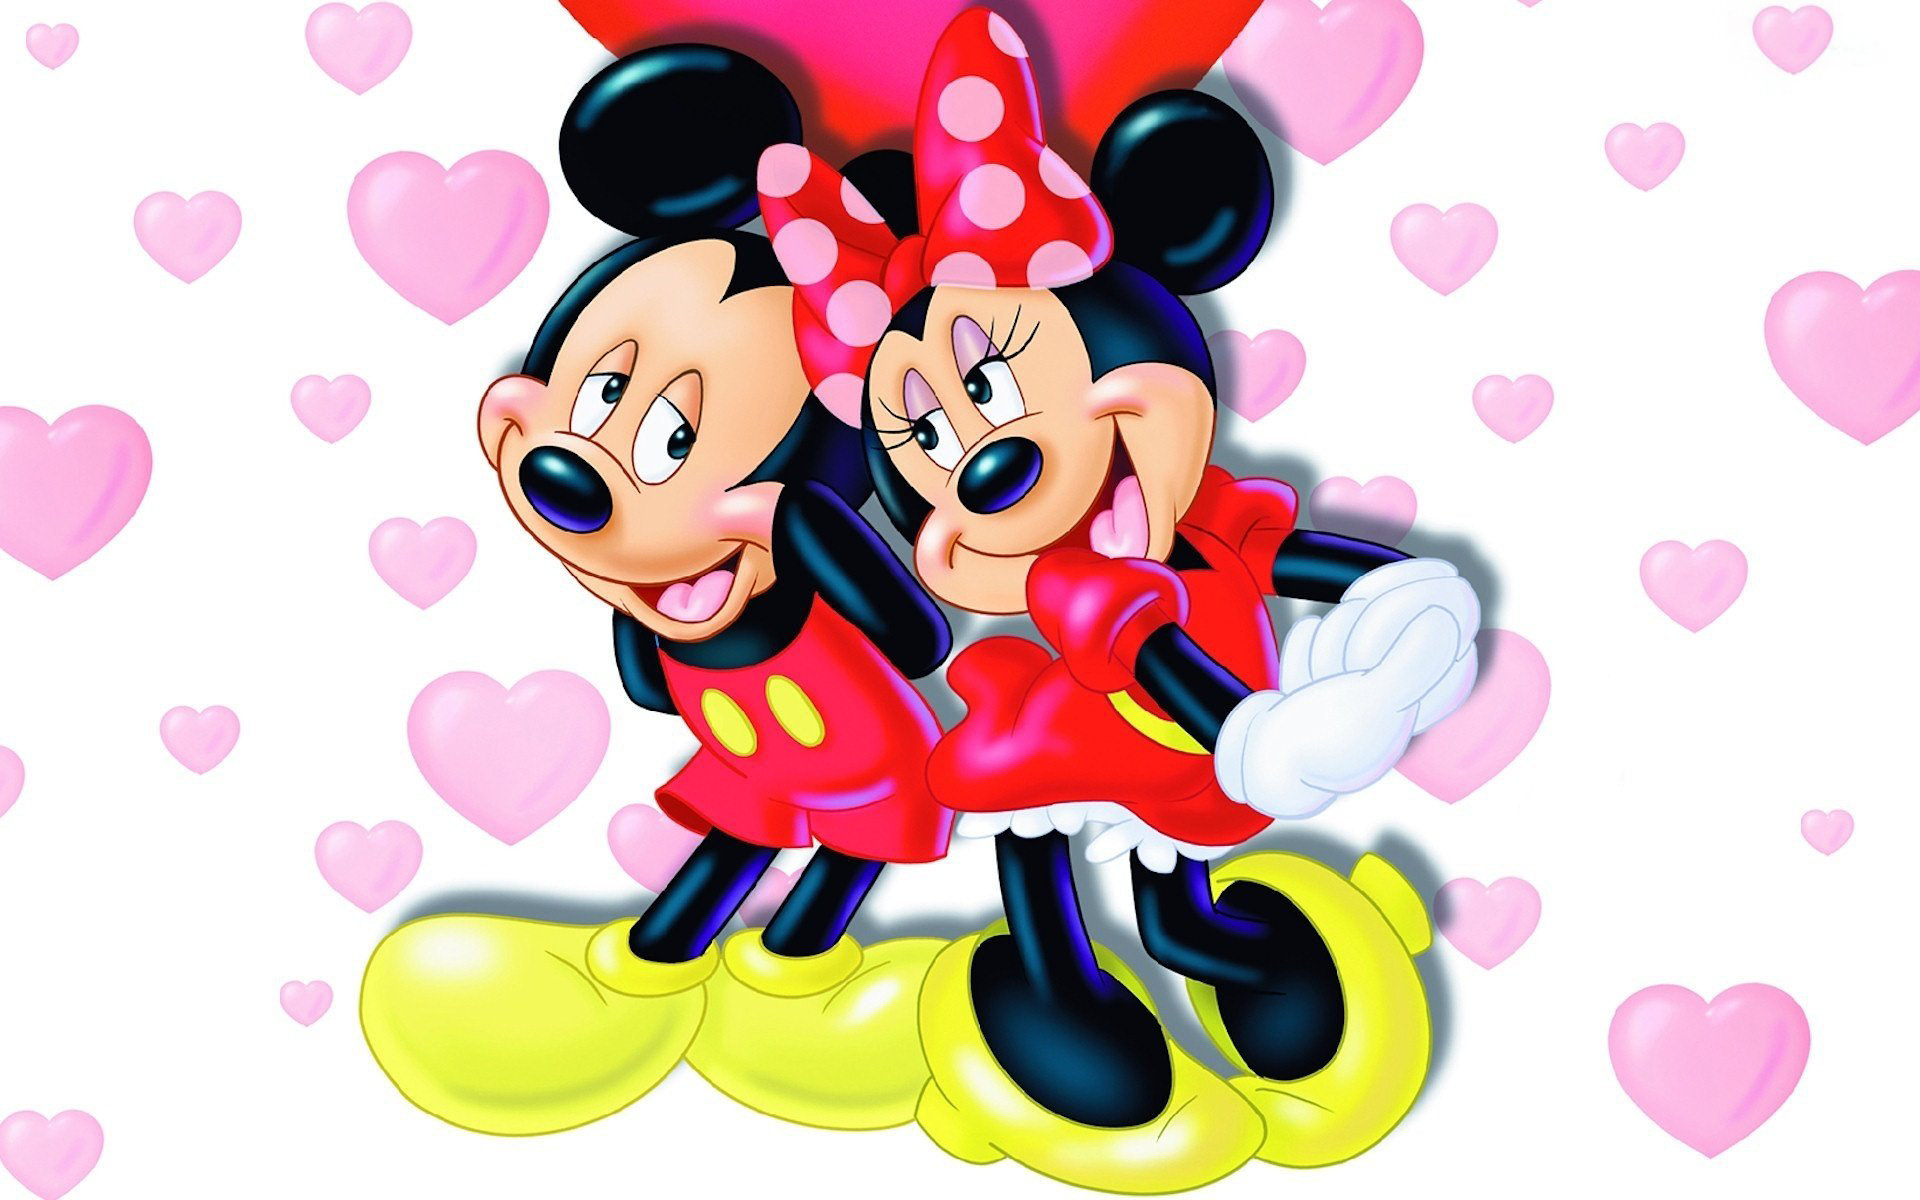 download wallpaper mickey mouse #18